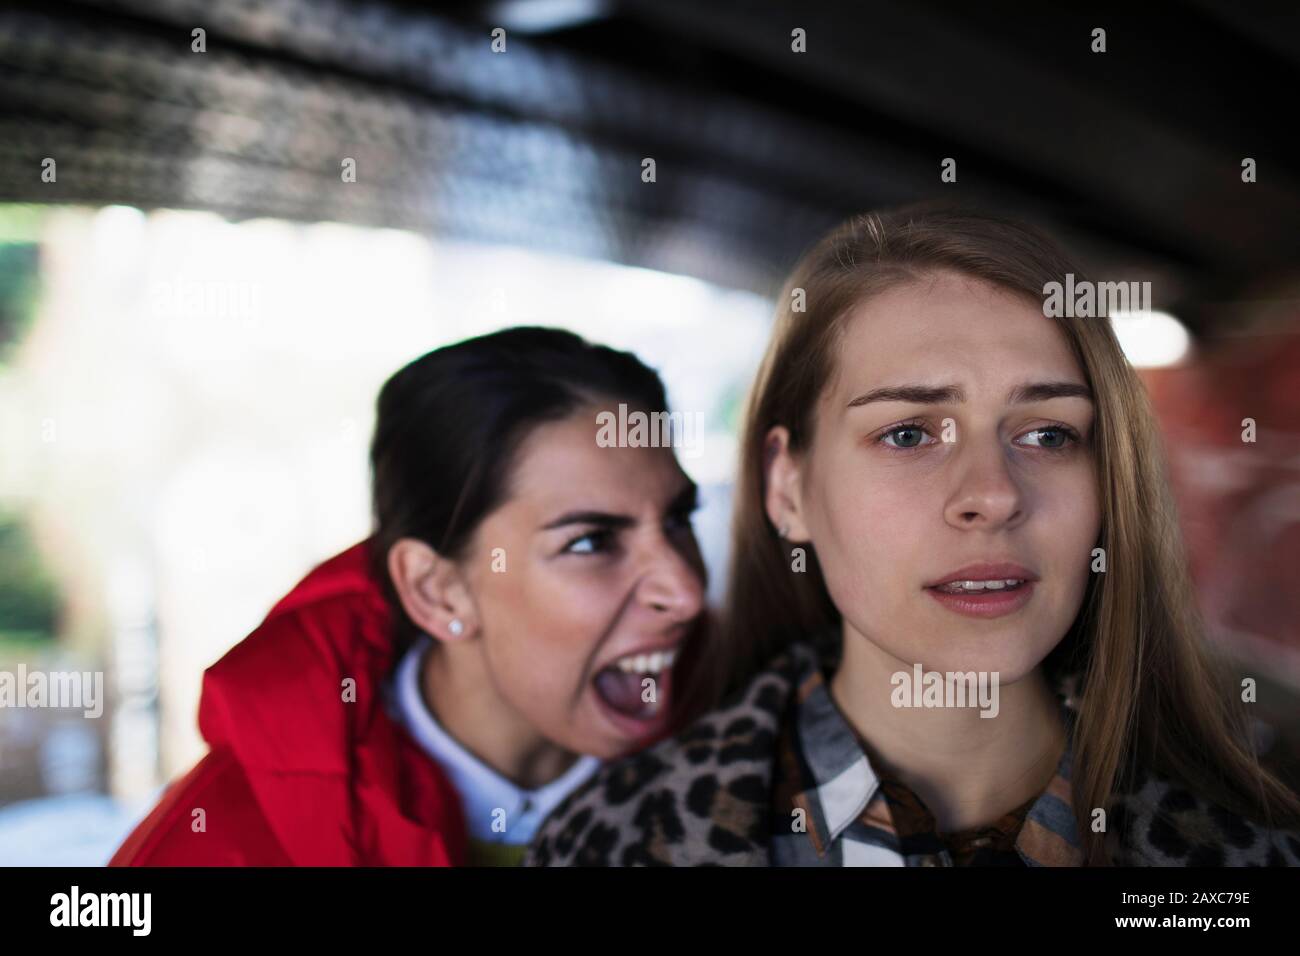 Angry young woman yelling at friend Stock Photo